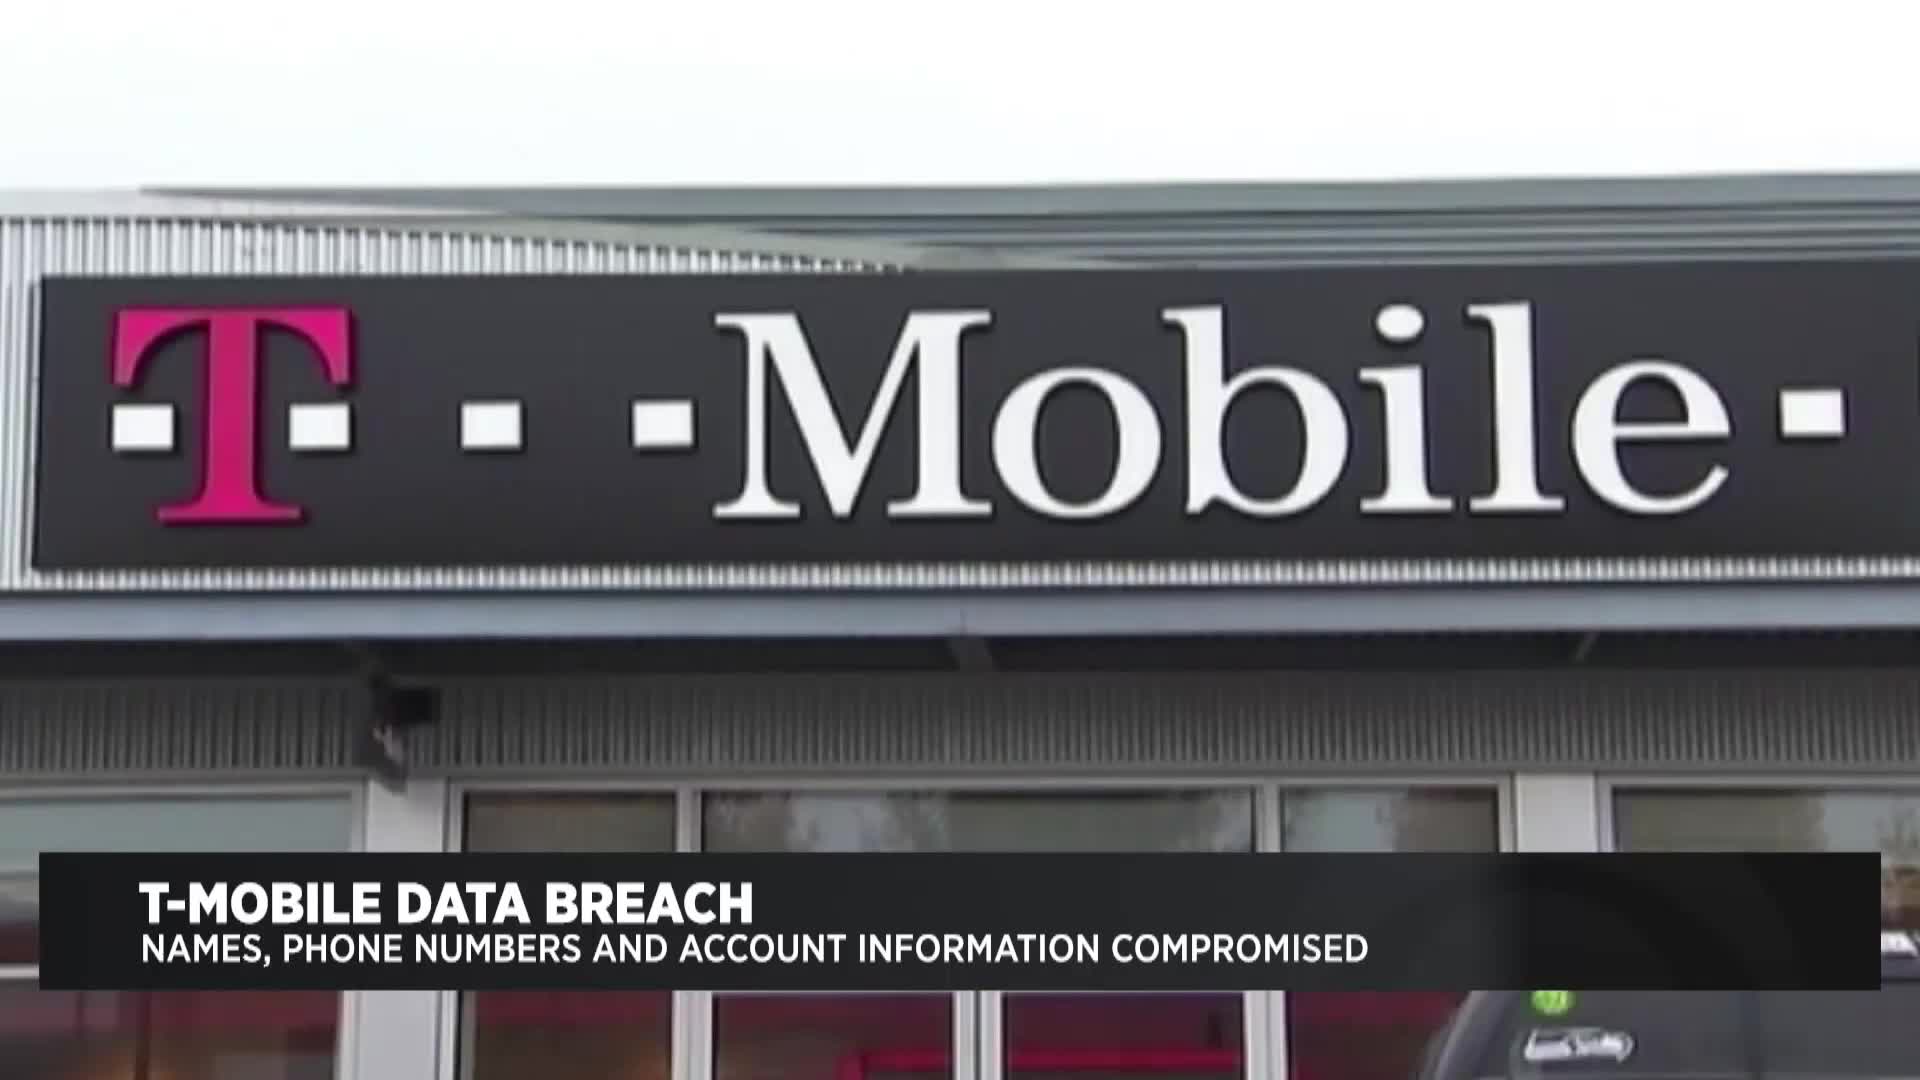 Hackers Access T-Mobile Customer Information In Data Breach